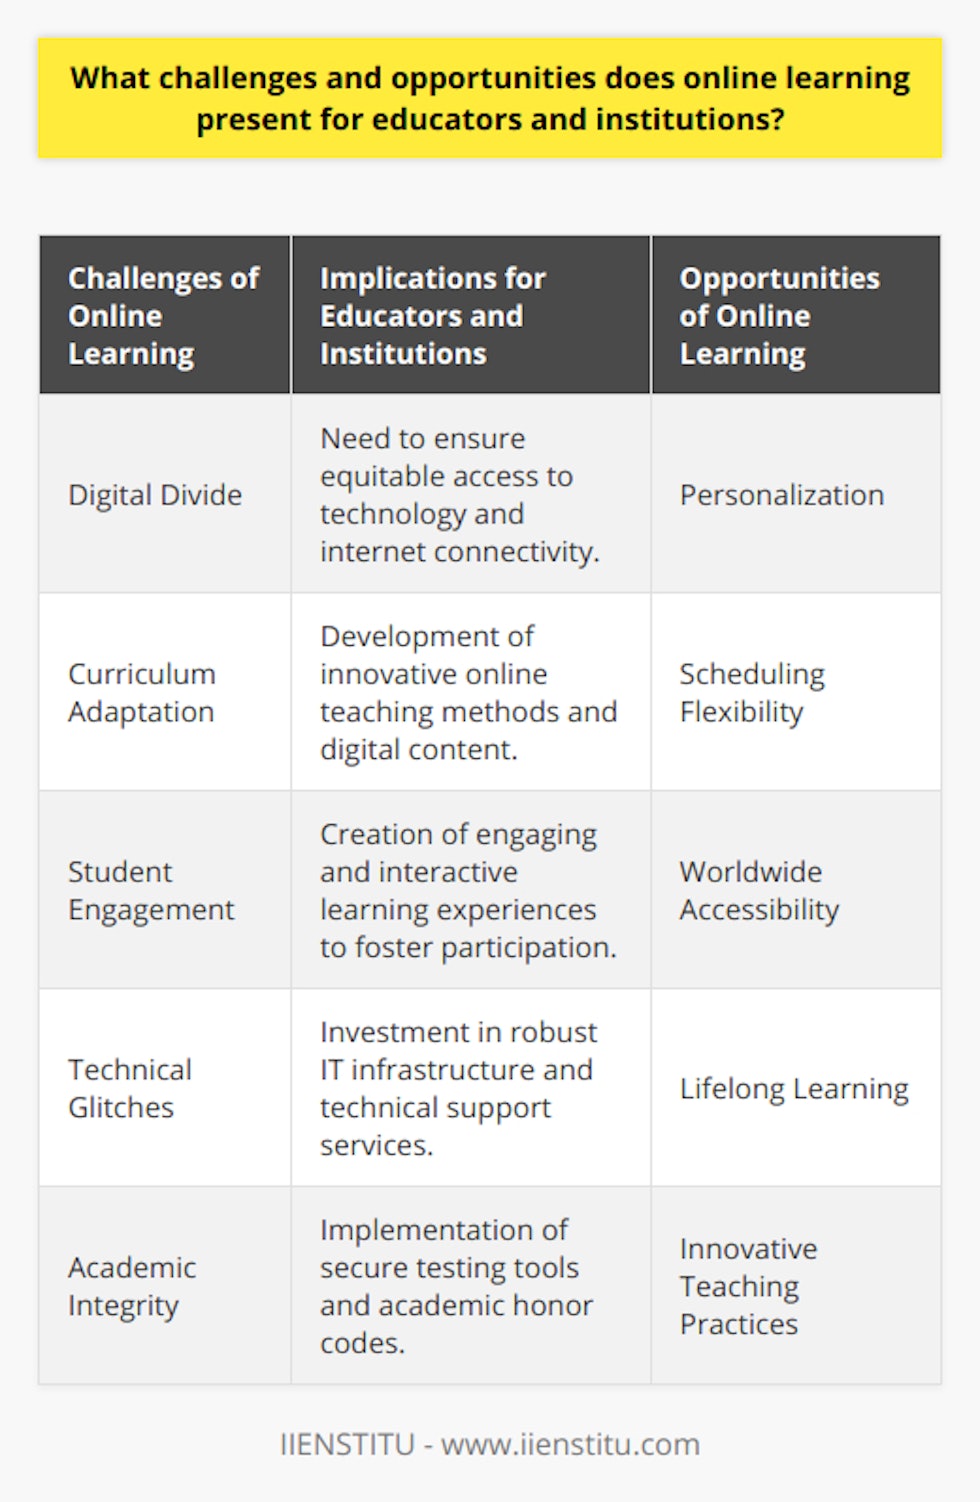 Online learning has dramatically altered the educational landscape, providing unprecedented flexibility and access to knowledge. However, it's not without its challenges and opportunities for educators and institutions. Here are some of the key points to consider:Challenges1. Digital Divide: There remains an inequality in access to technology and reliable internet connections, which can create barriers for students trying to engage fully with online learning.2. Curriculum Adaptation: Translating traditional curricula into effective online learning experiences can be complex. Educators must reimagine their teaching methods to harness the strengths of a digital platform.3. Student Engagement: Keeping students engaged and focused in an online environment is difficult. Without the physical presence of a classroom, students might struggle with motivation and participation.4. Technical Glitches: Technical difficulties can disrupt the flow of teaching and learning. Institutions must invest in robust IT infrastructure and support to minimize these disruptions.5. Academic Integrity: Online environments sometimes make it harder to monitor assessments, which can lead to issues with academic dishonesty. It's vital to develop secure testing environments and honor codes.Opportunities1. Personalization: Online learning platforms allow for a high degree of personalization, offering students tailored learning paths according to their strengths, needs, and interests.2. Scheduling Flexibility: The asynchronous aspect of online courses provides students the convenience to learn at their own pace, making education more accessible for those balancing other responsibilities.3. Worldwide Accessibility: Online learning breaks down geographical barriers, enabling institutions to reach a global student body and providing learners with a diverse, rich educational experience.4. Lifelong Learning: The ease of access to online courses supports the concept of lifelong learning. Professionals can upskill or reskill as needed, remaining competitive in the job market.5. Innovative Teaching Practices: Educators are pushed to innovate, harnessing multimedia resources, interactive forums, and other technological tools to enhance the learning experience.In contexts like these, institutions such as IIENSTITU play a critical role by providing a platform for digital education, offering a range of courses that leverage the opportunities while working to mitigate the challenges of online learning. Overall, the digital education space is evolving, with educators and institutions continuously developing strategies to improve virtual learning experiences and to offer quality education to learners worldwide.